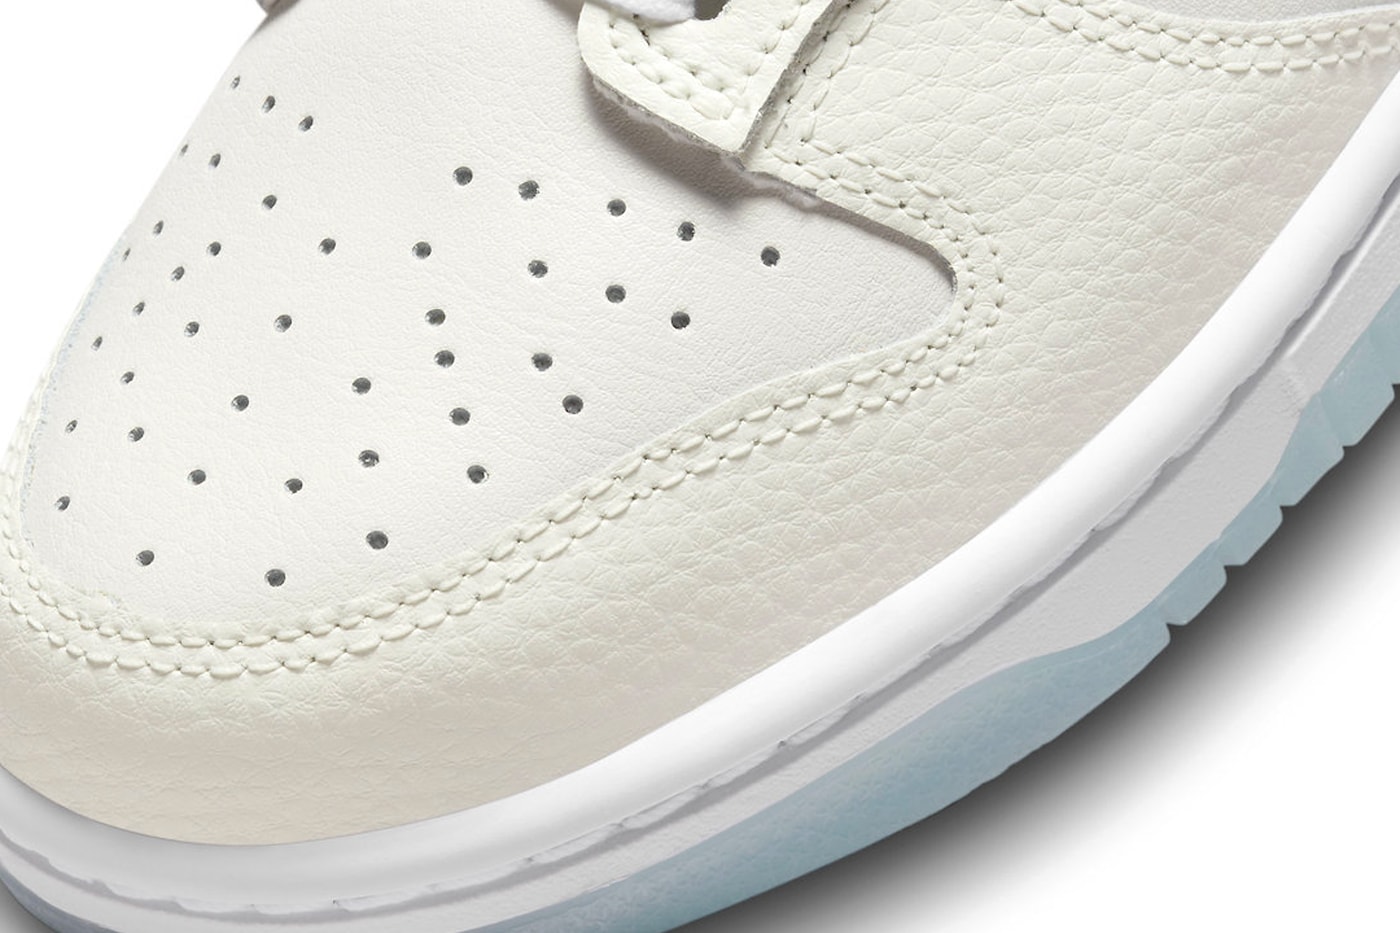 Nike Dunk Low Receives a "Supersonic" Treatment FN7646-030 White/Igloo-Black-Neutral Grey release info classic white shoes low tops swoosh air force 1 alternatives